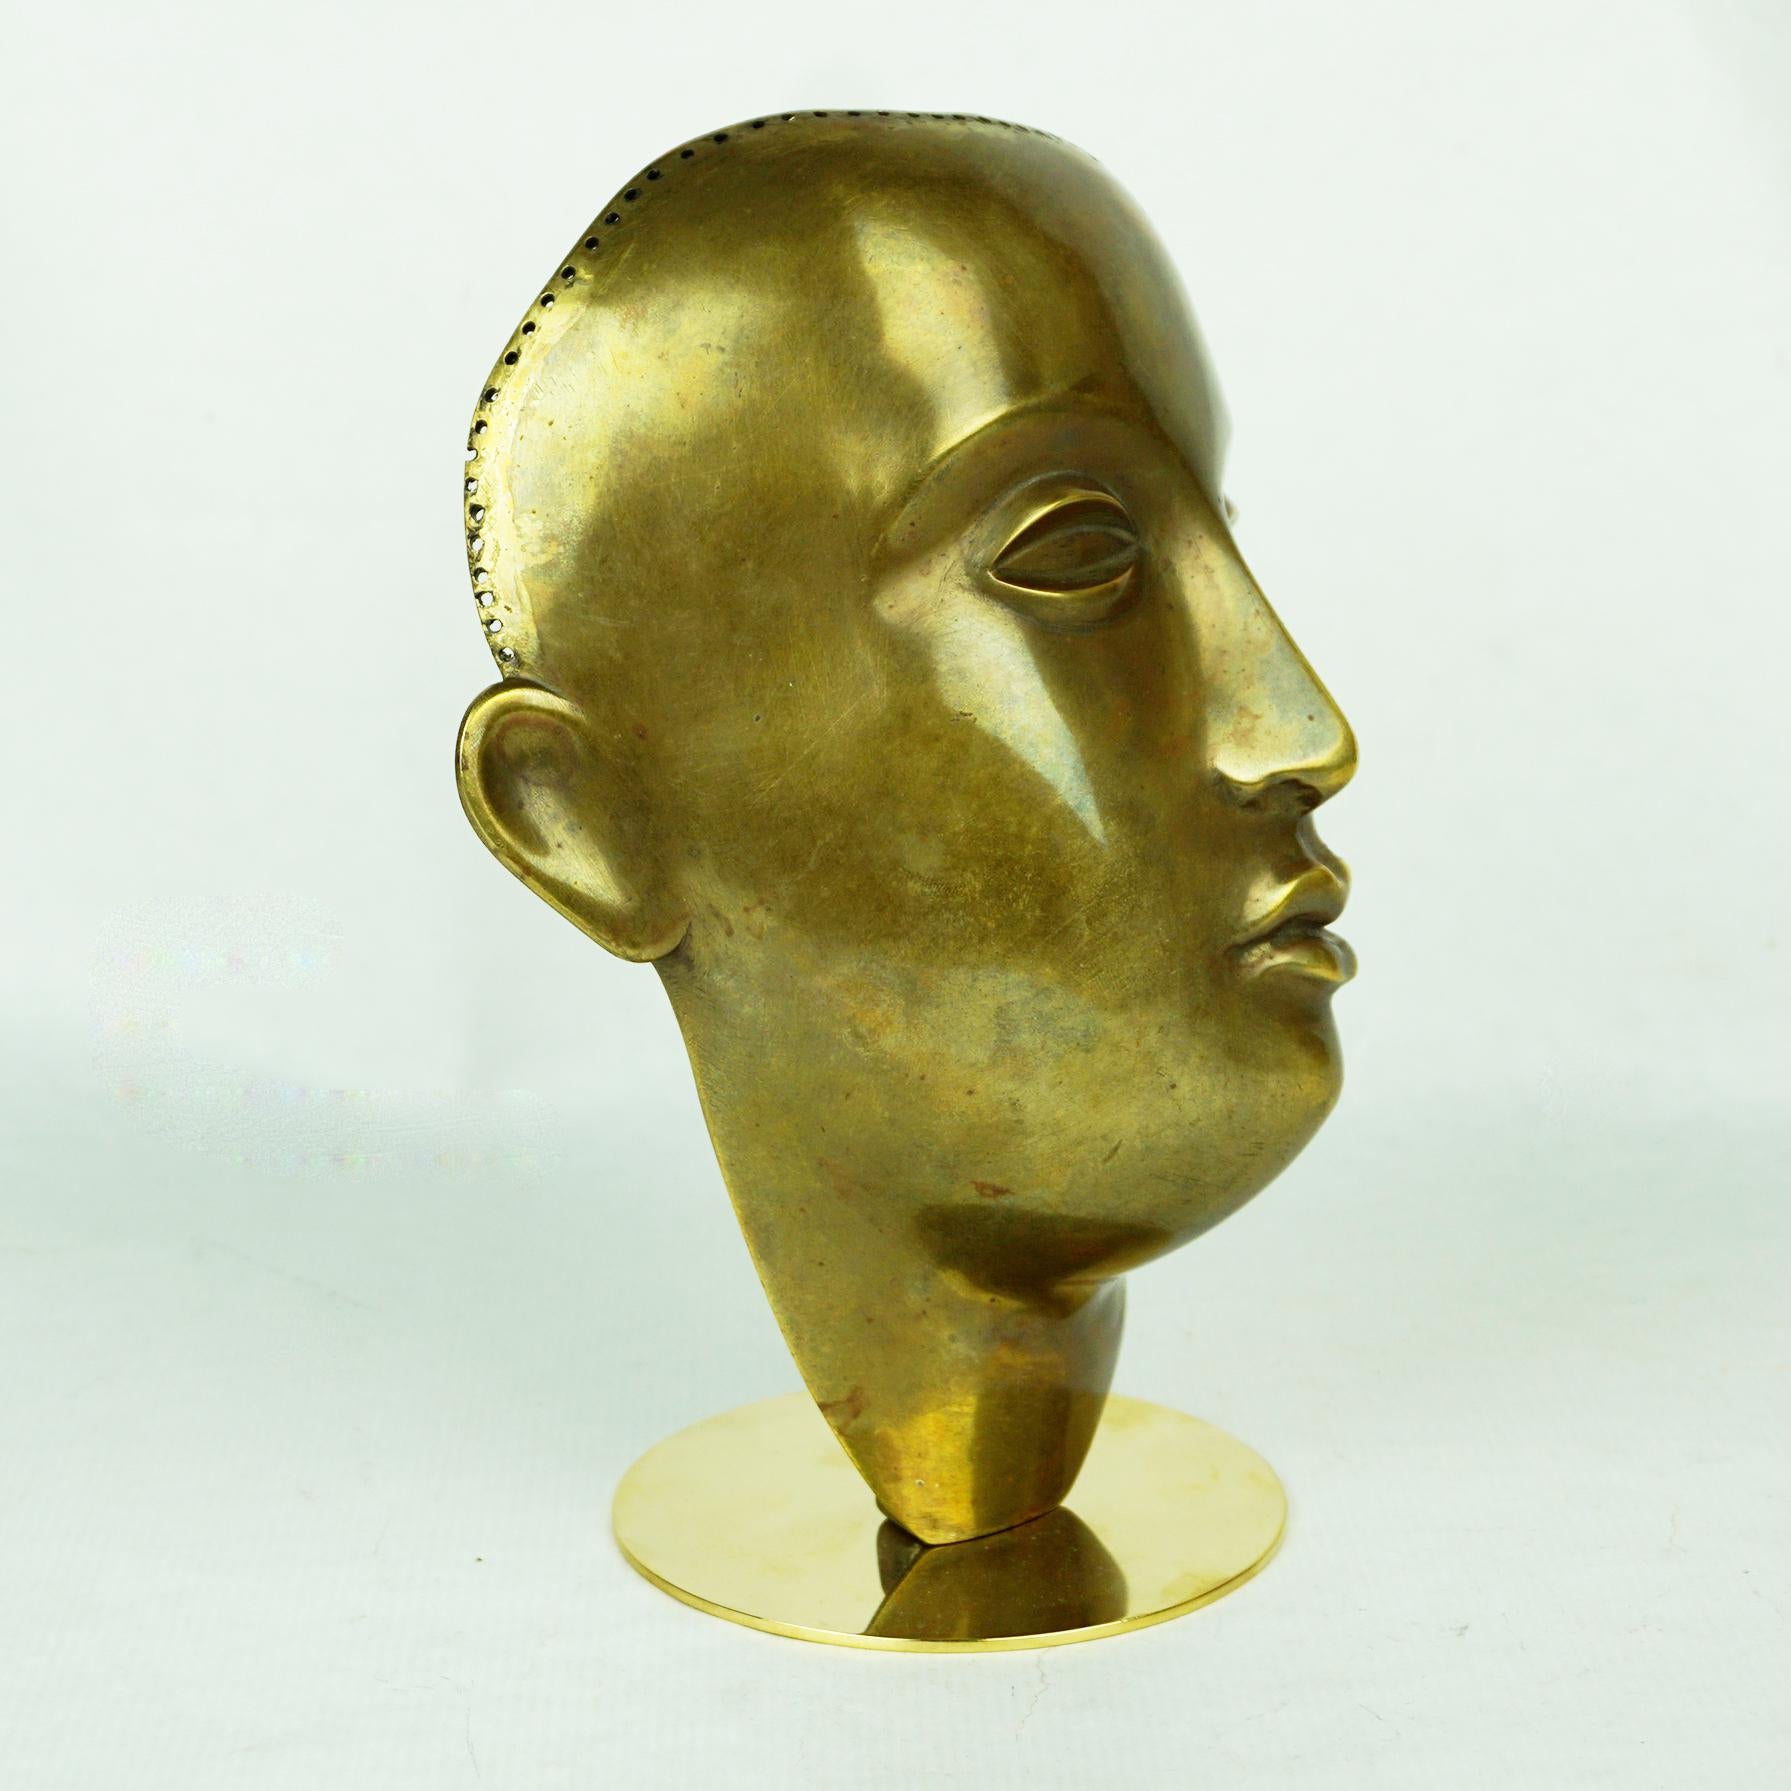 This fantastic brass sculpture on a circular brass base was designed by Franz Hagenauer and manufactured by Werkstätte Hagenauer Vienna in the 1930s. It´s absolutely classic design is a timeless beauty and as well an iconic masterpiece by the